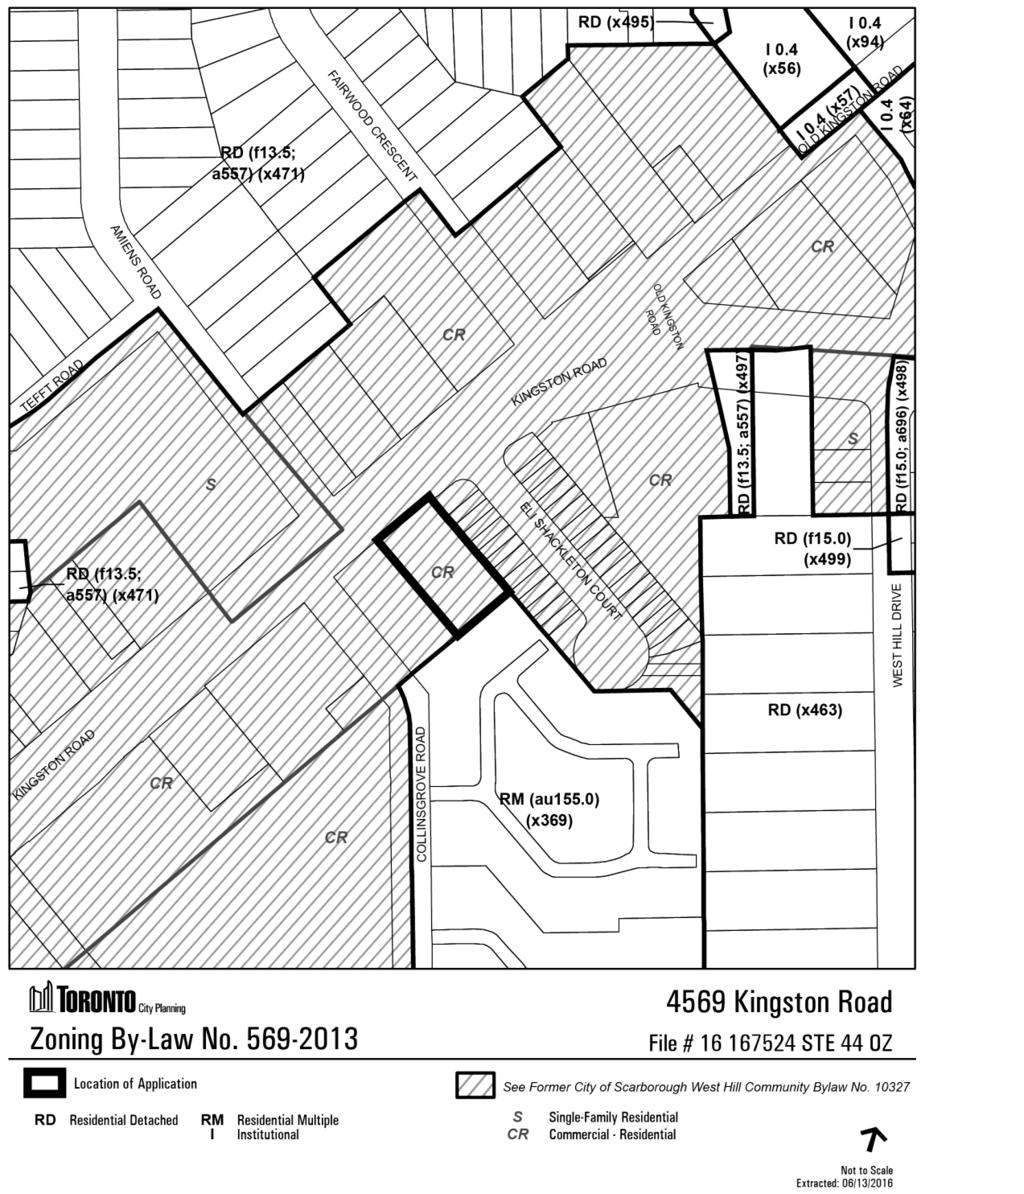 Attachment 6: Zoning Staff report for